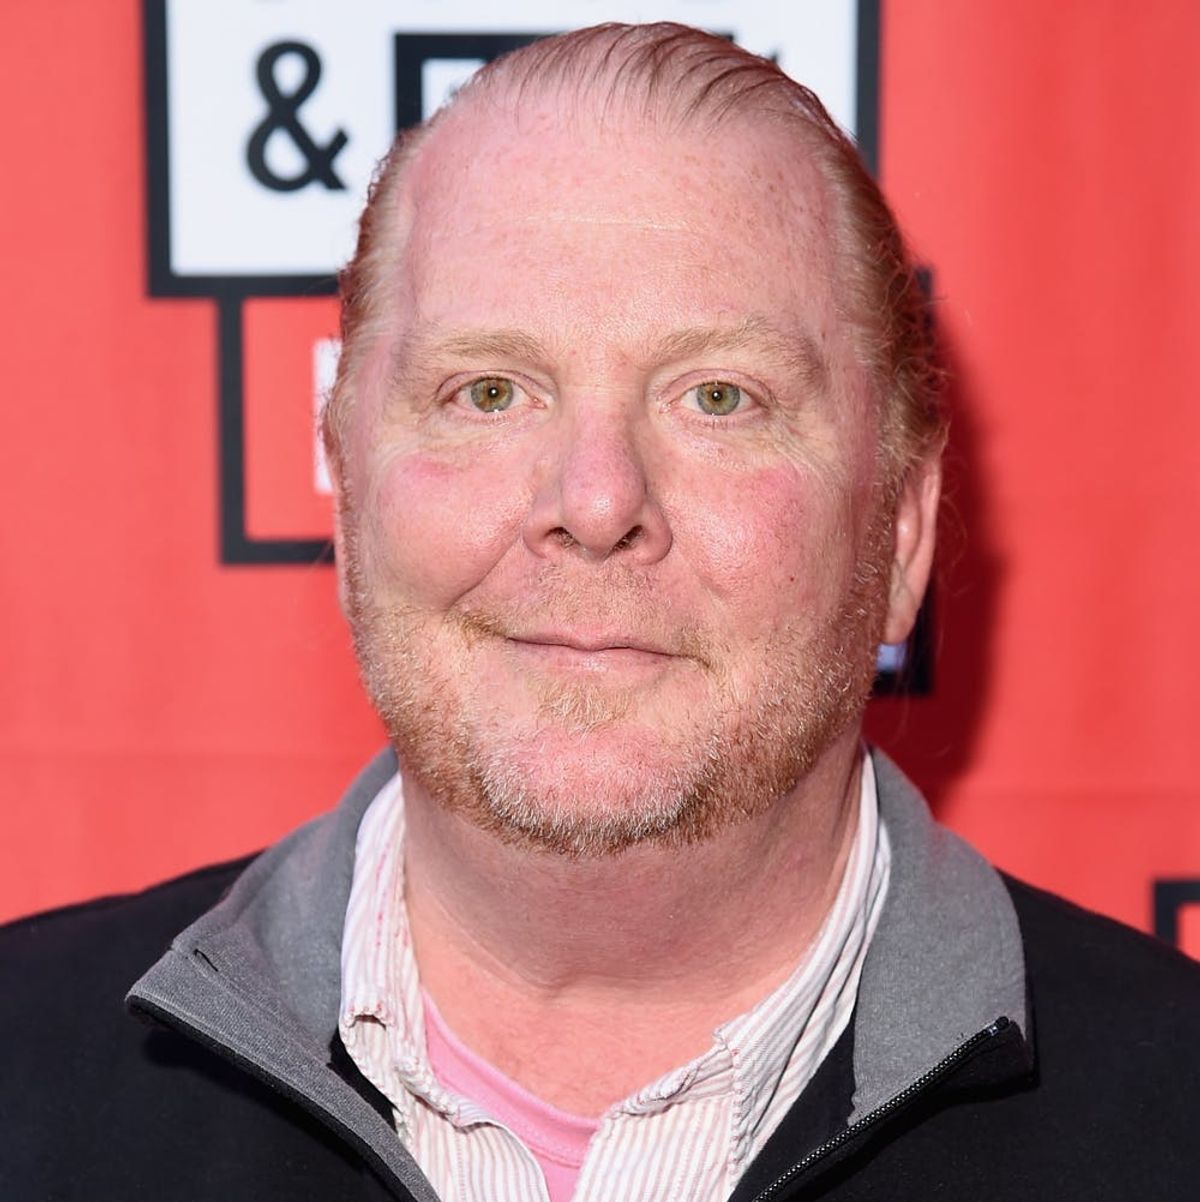 This Blogger Baked Mario Batali’s ‘Apology’ Cinnamon Rolls and Broke the Internet